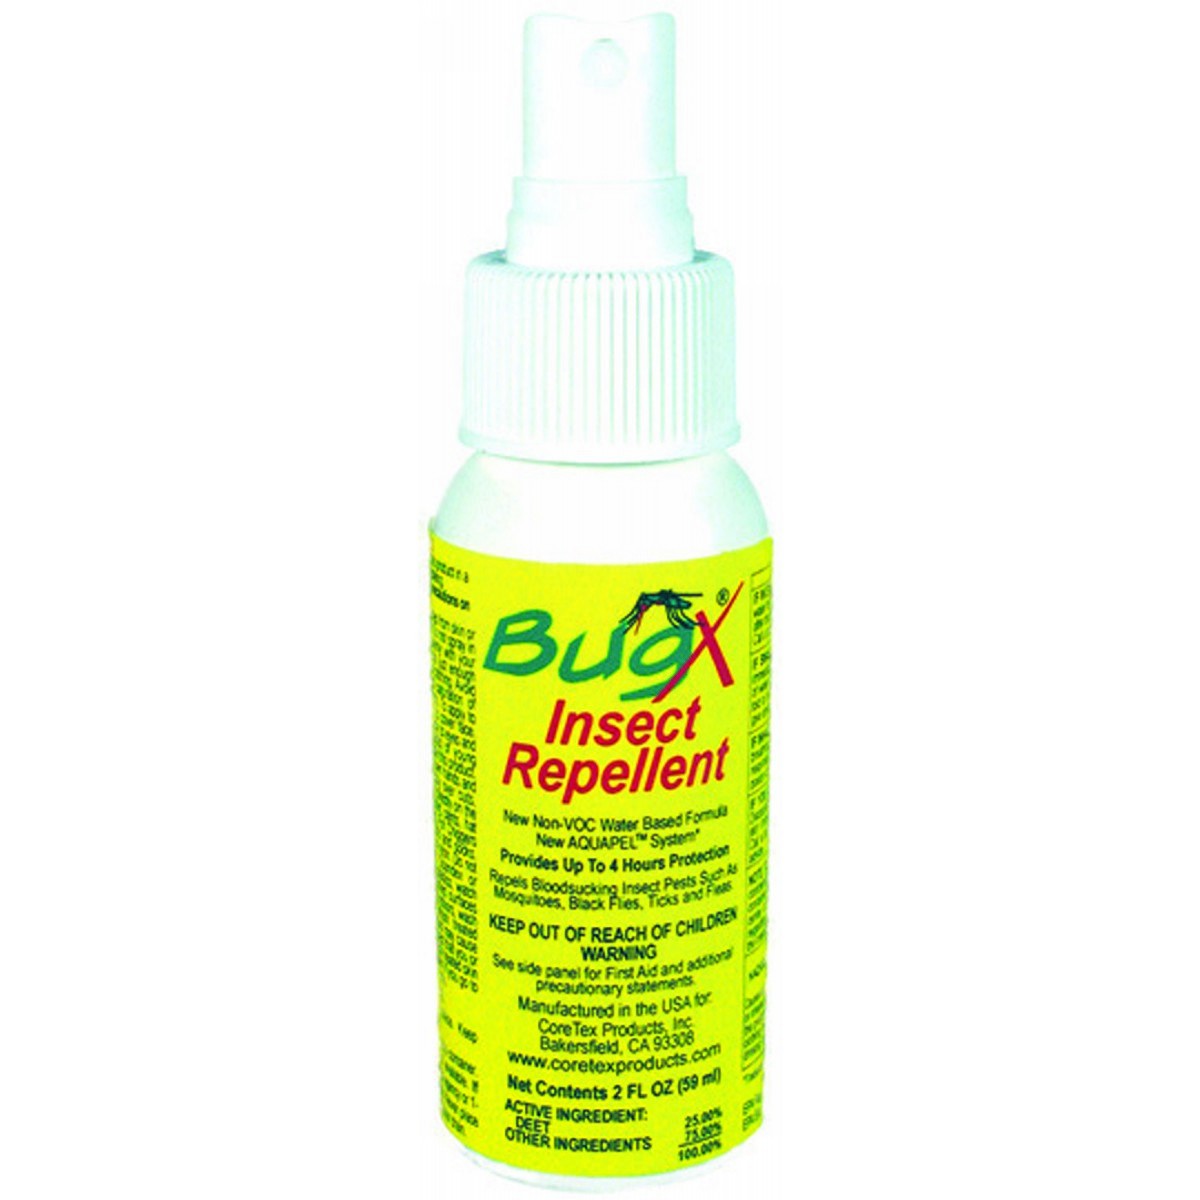 Honeywell 2 Ounce Pump Spray Bottle BugX30 Insect Repellent (Availability restrictions apply.)